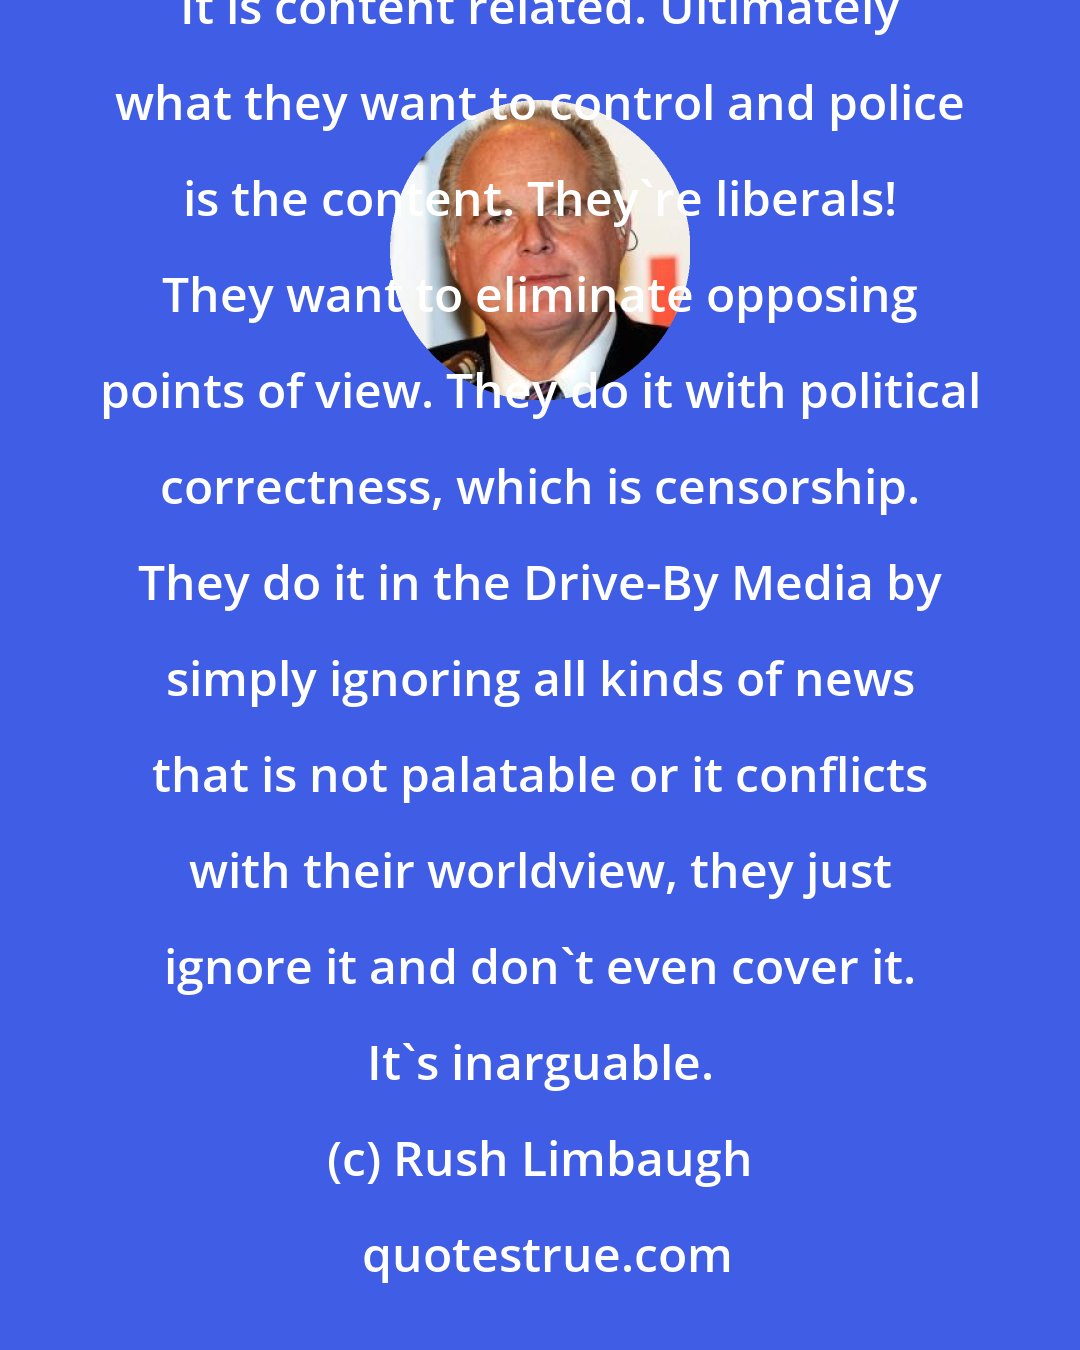 Rush Limbaugh: If there were no controls on the internet - and I shudder to think at letting certain people have control of it. It is content related. Ultimately what they want to control and police is the content. They're liberals! They want to eliminate opposing points of view. They do it with political correctness, which is censorship. They do it in the Drive-By Media by simply ignoring all kinds of news that is not palatable or it conflicts with their worldview, they just ignore it and don't even cover it. It's inarguable.